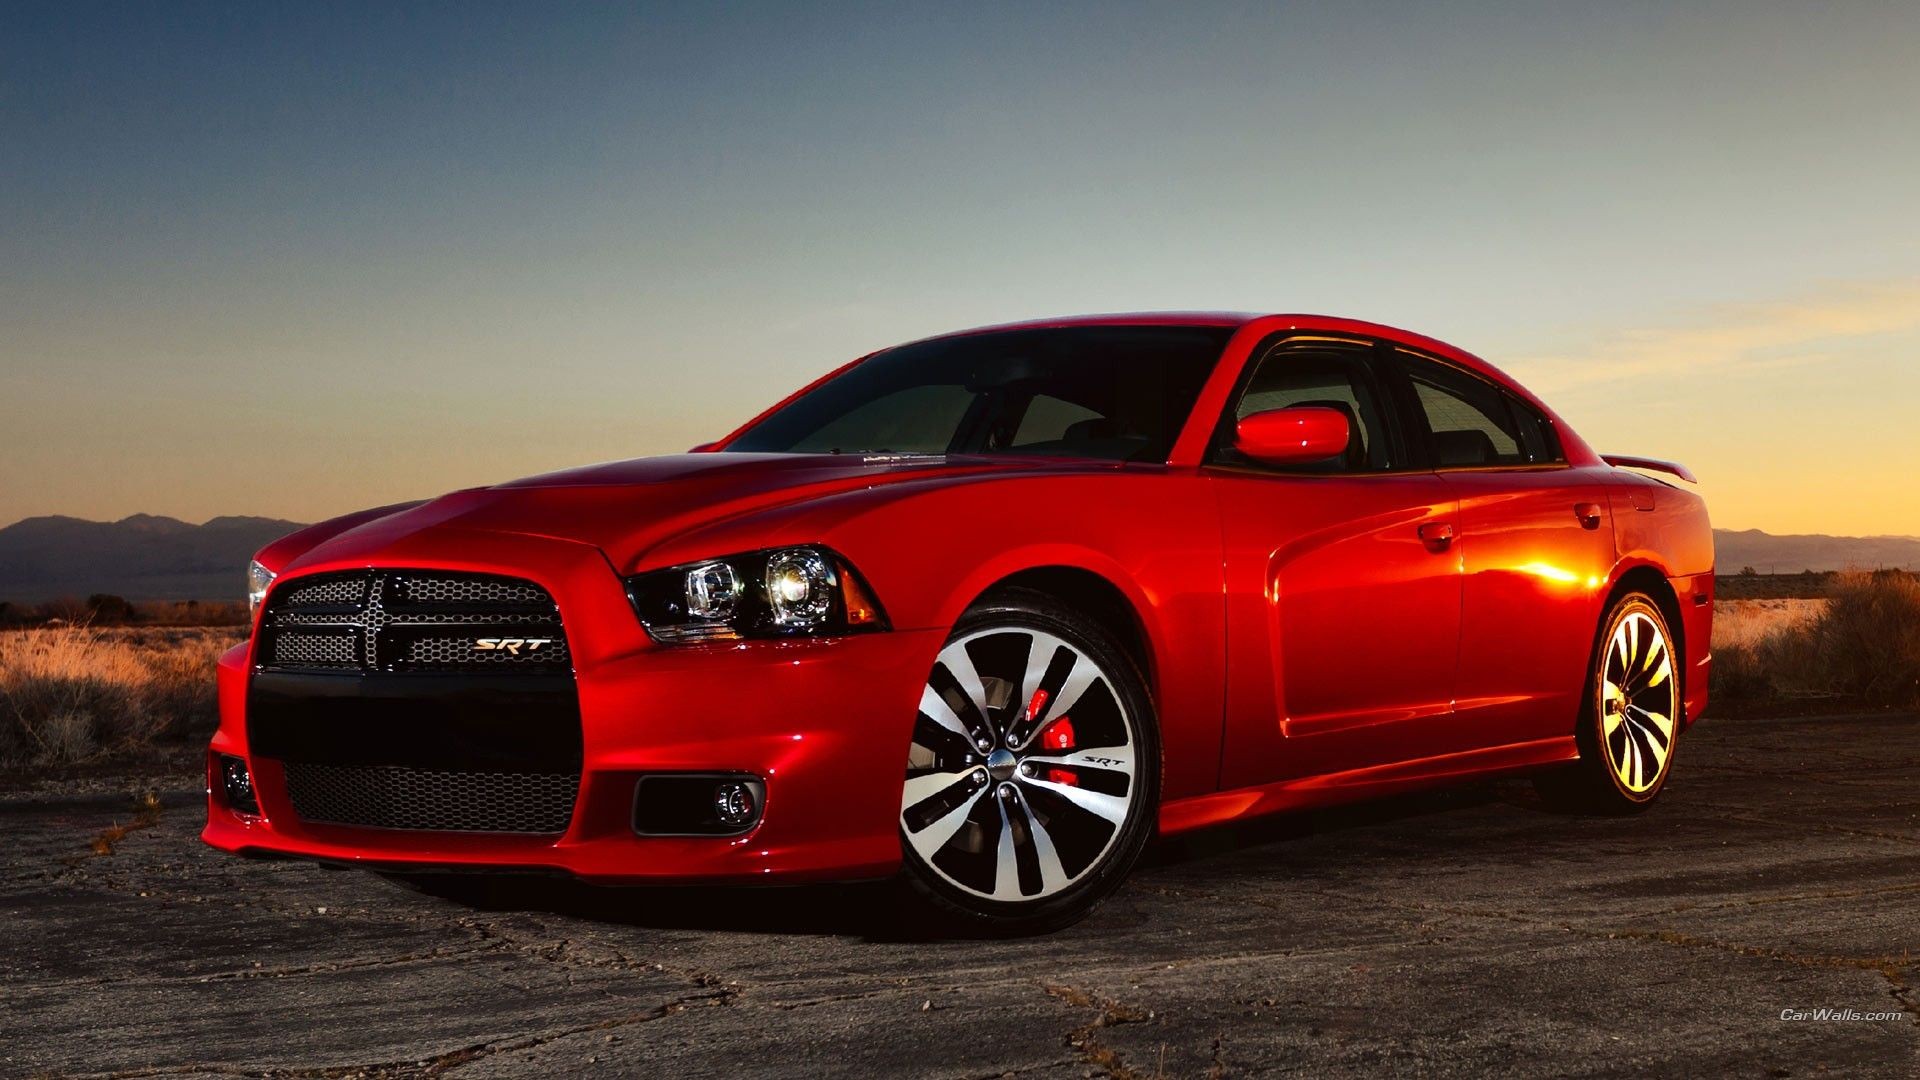 General 1920x1080 car Dodge red cars vehicle Dodge Charger muscle cars American cars Stellantis